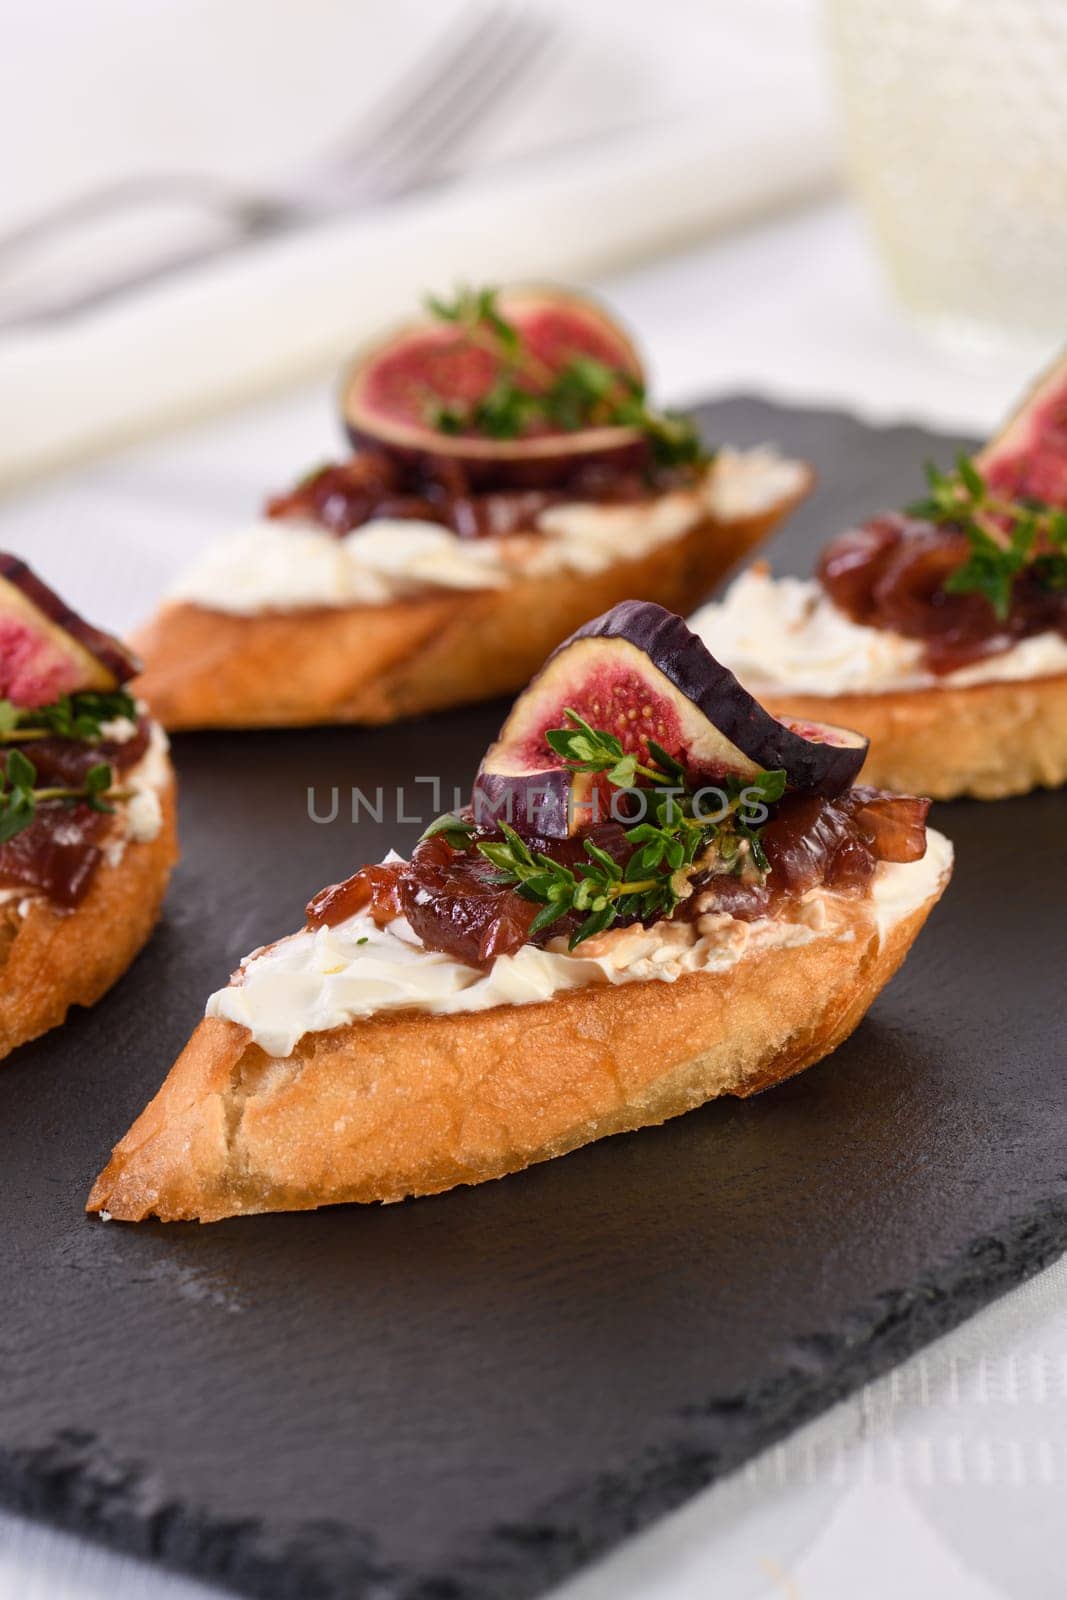 Crostini with onion jam, figs and cheese by Apolonia